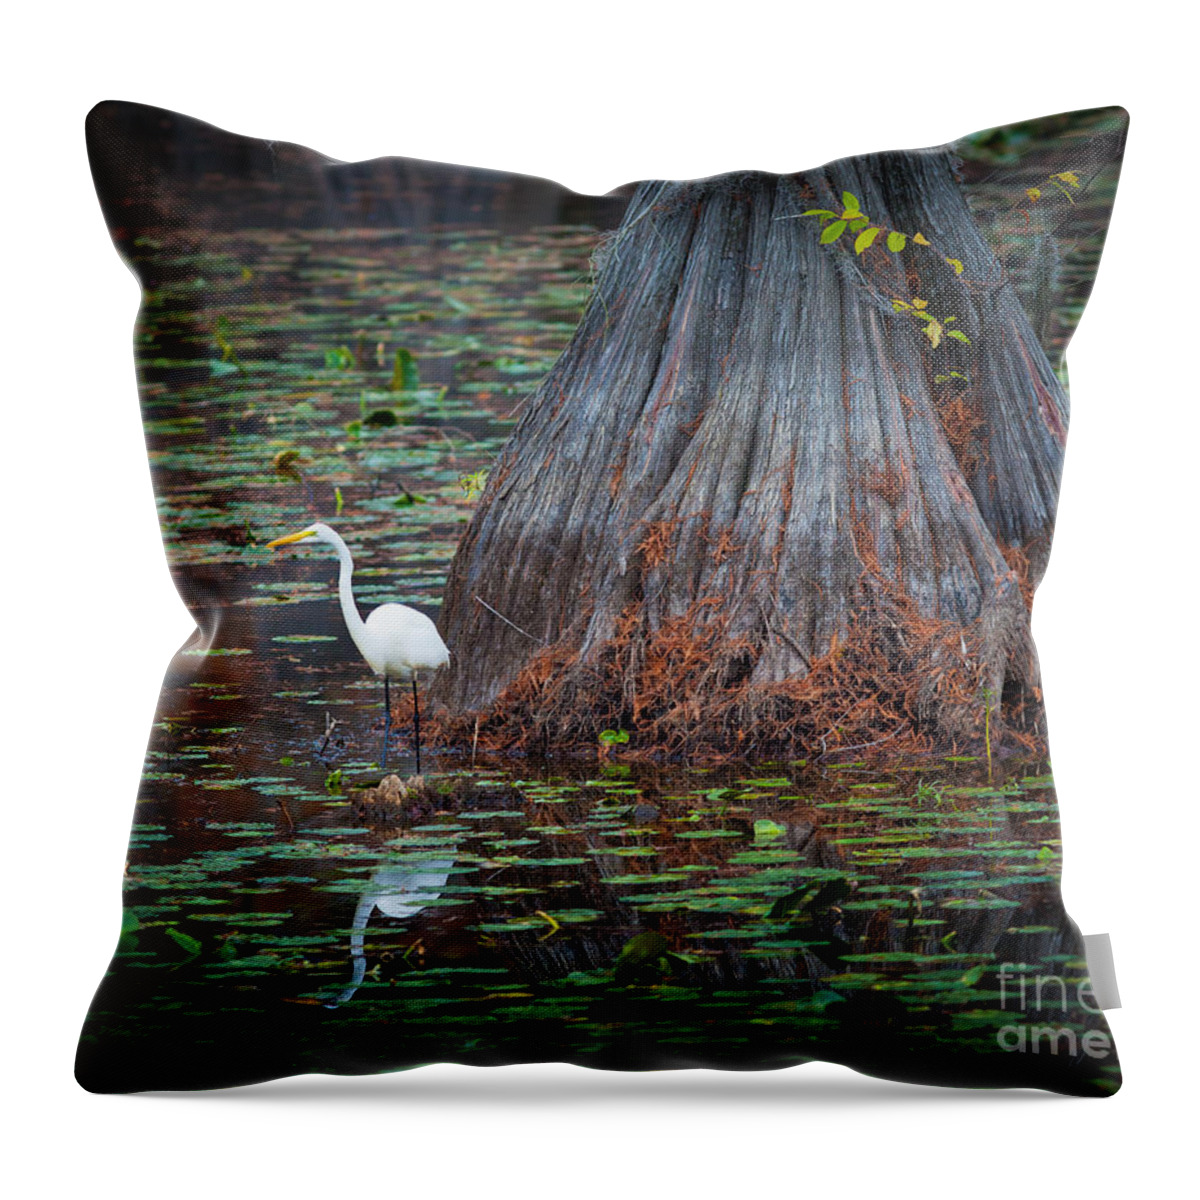 America Throw Pillow featuring the photograph Caddo Lake Egret by Inge Johnsson